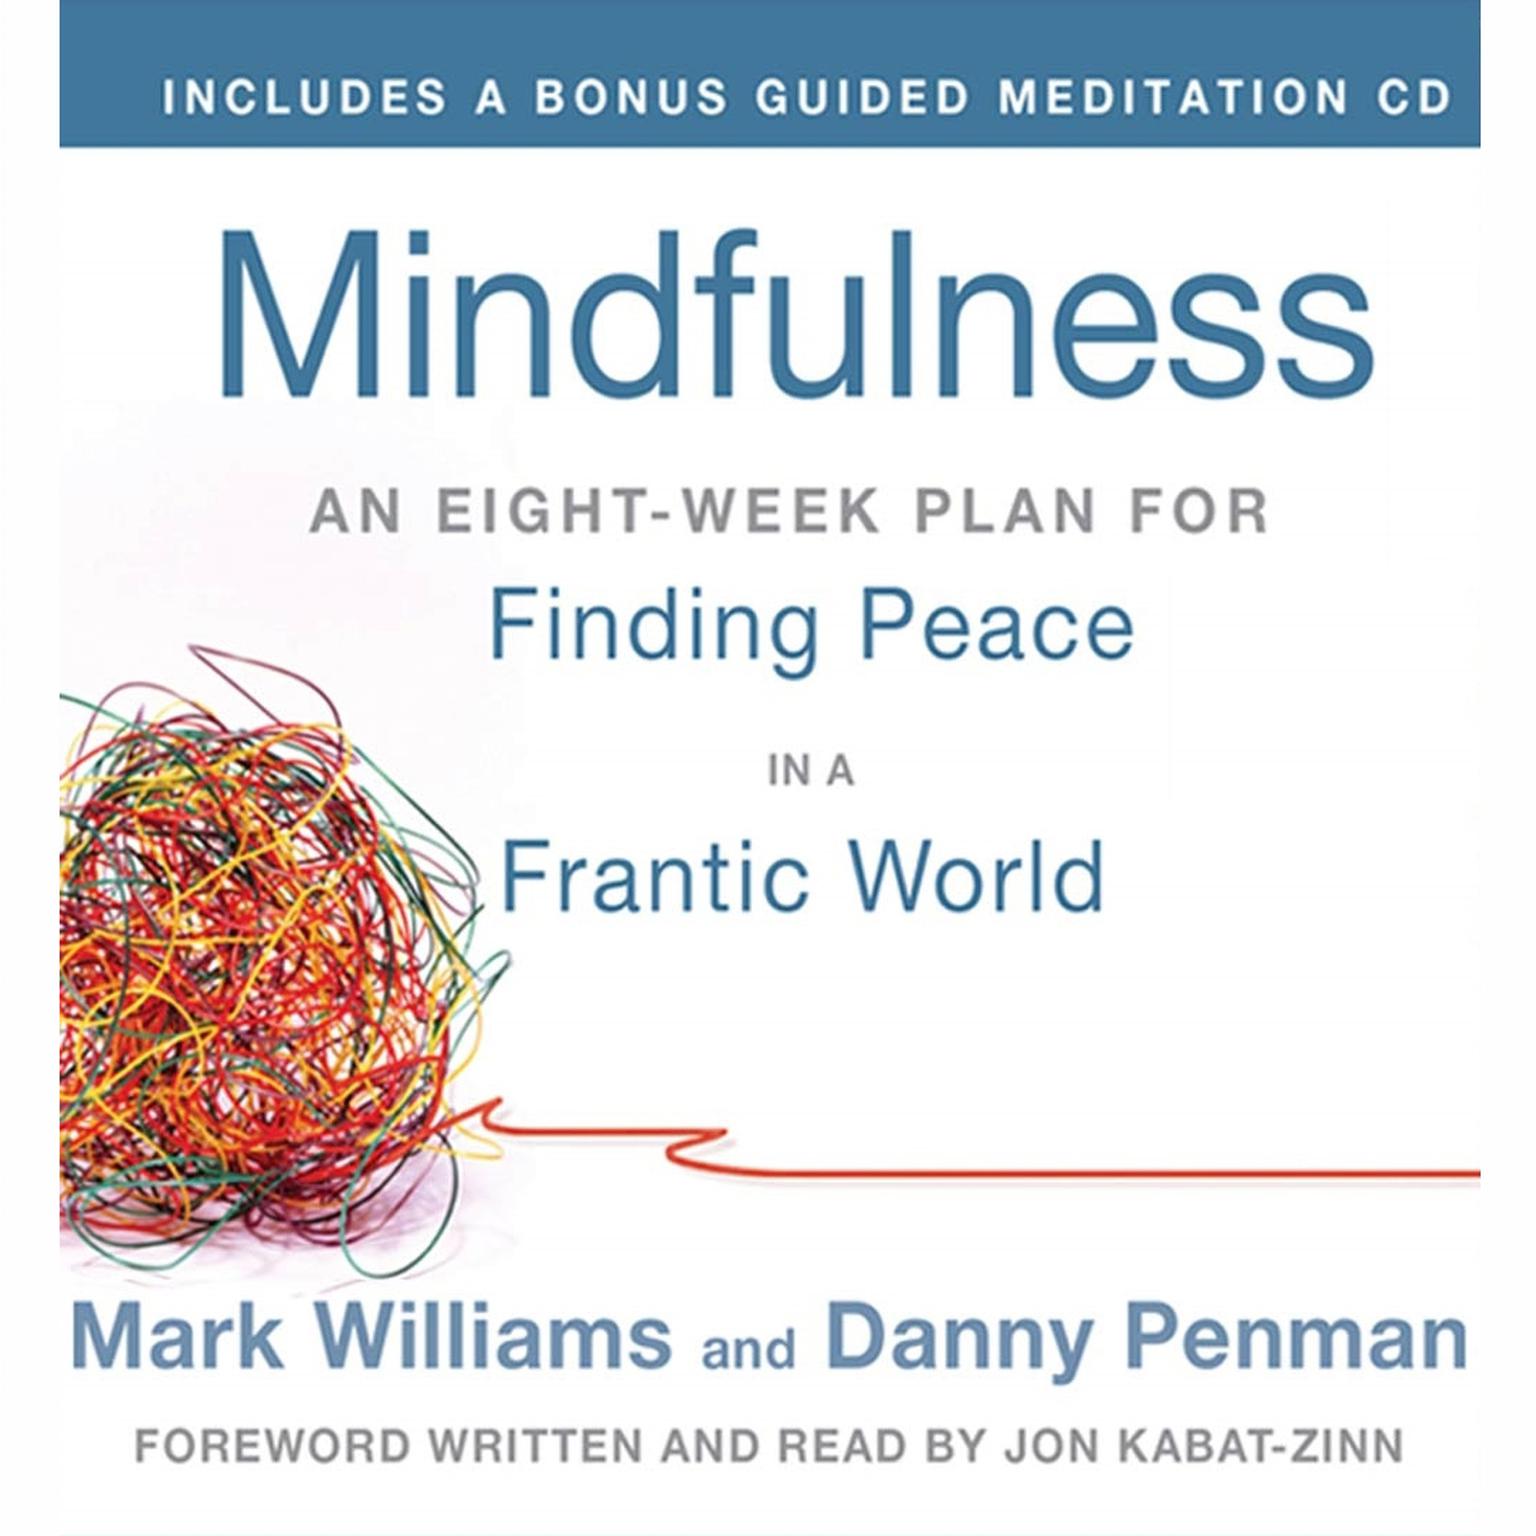 Mindfulness (Abridged): An Eight-Week Plan for Finding Peace in a Frantic World Audiobook, by Mark Williams